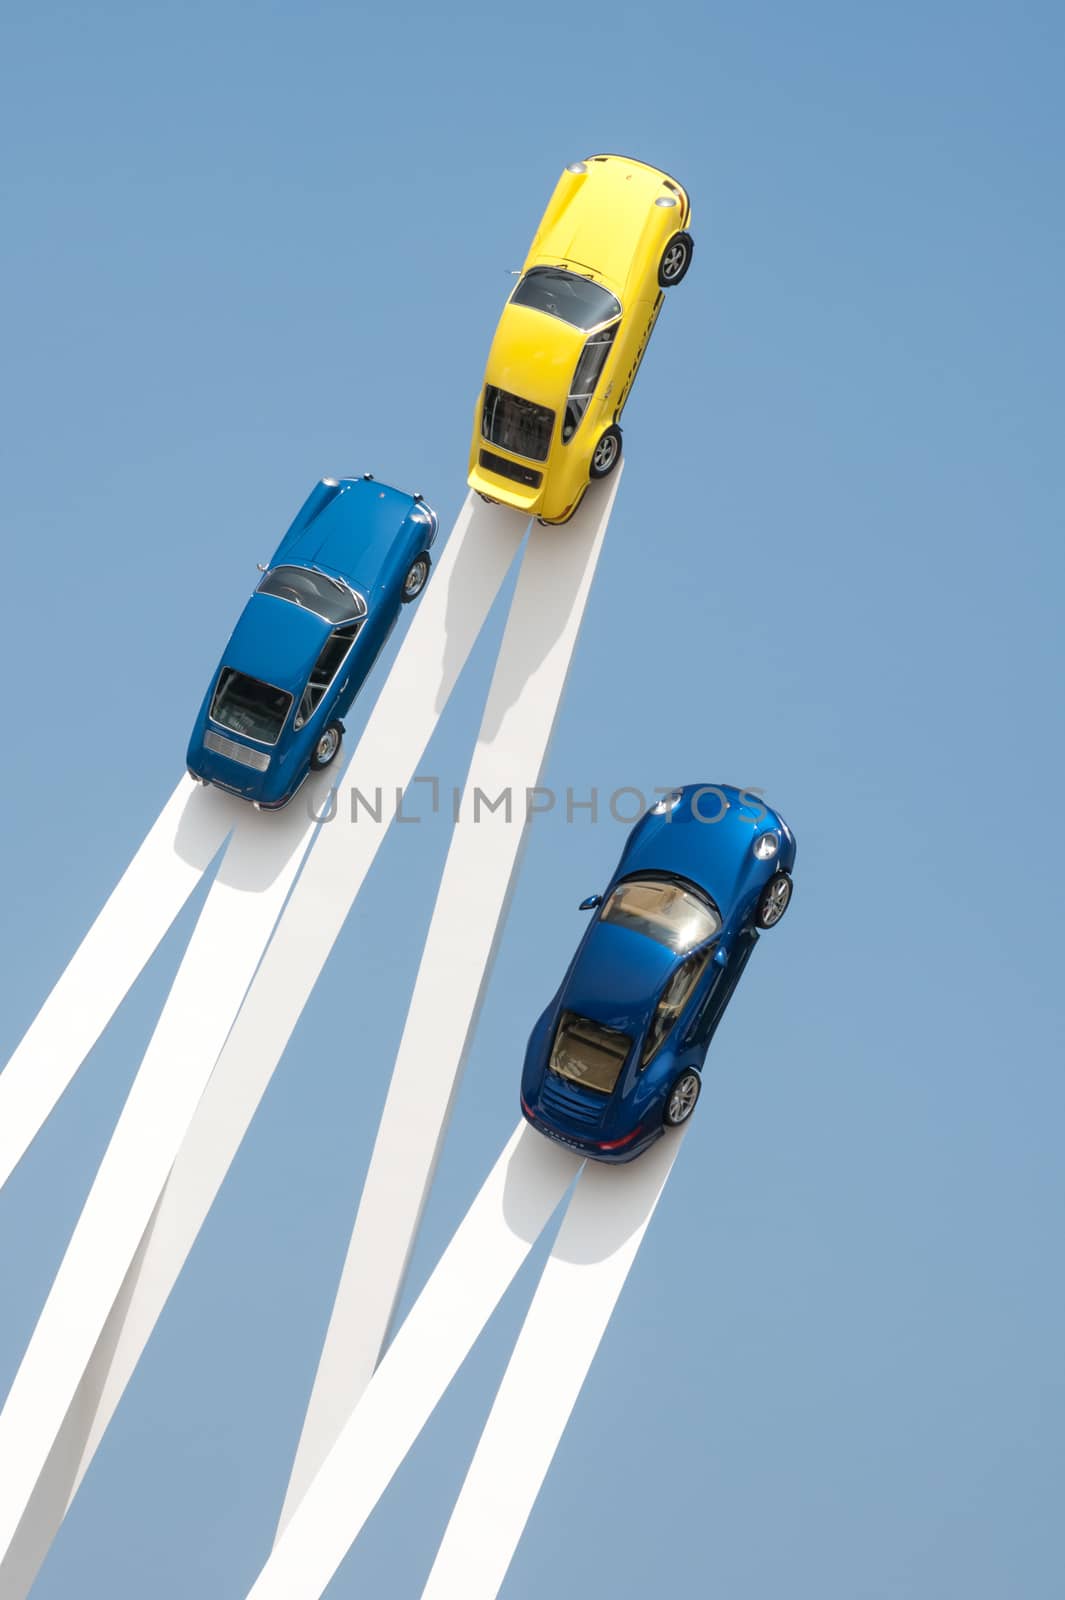 Goodwood, UK - July 13, 2013: Artistic exhibit of Porsche sports cars mounted on vertical platforms at the Festival of Speed event held at Goodwood, UK